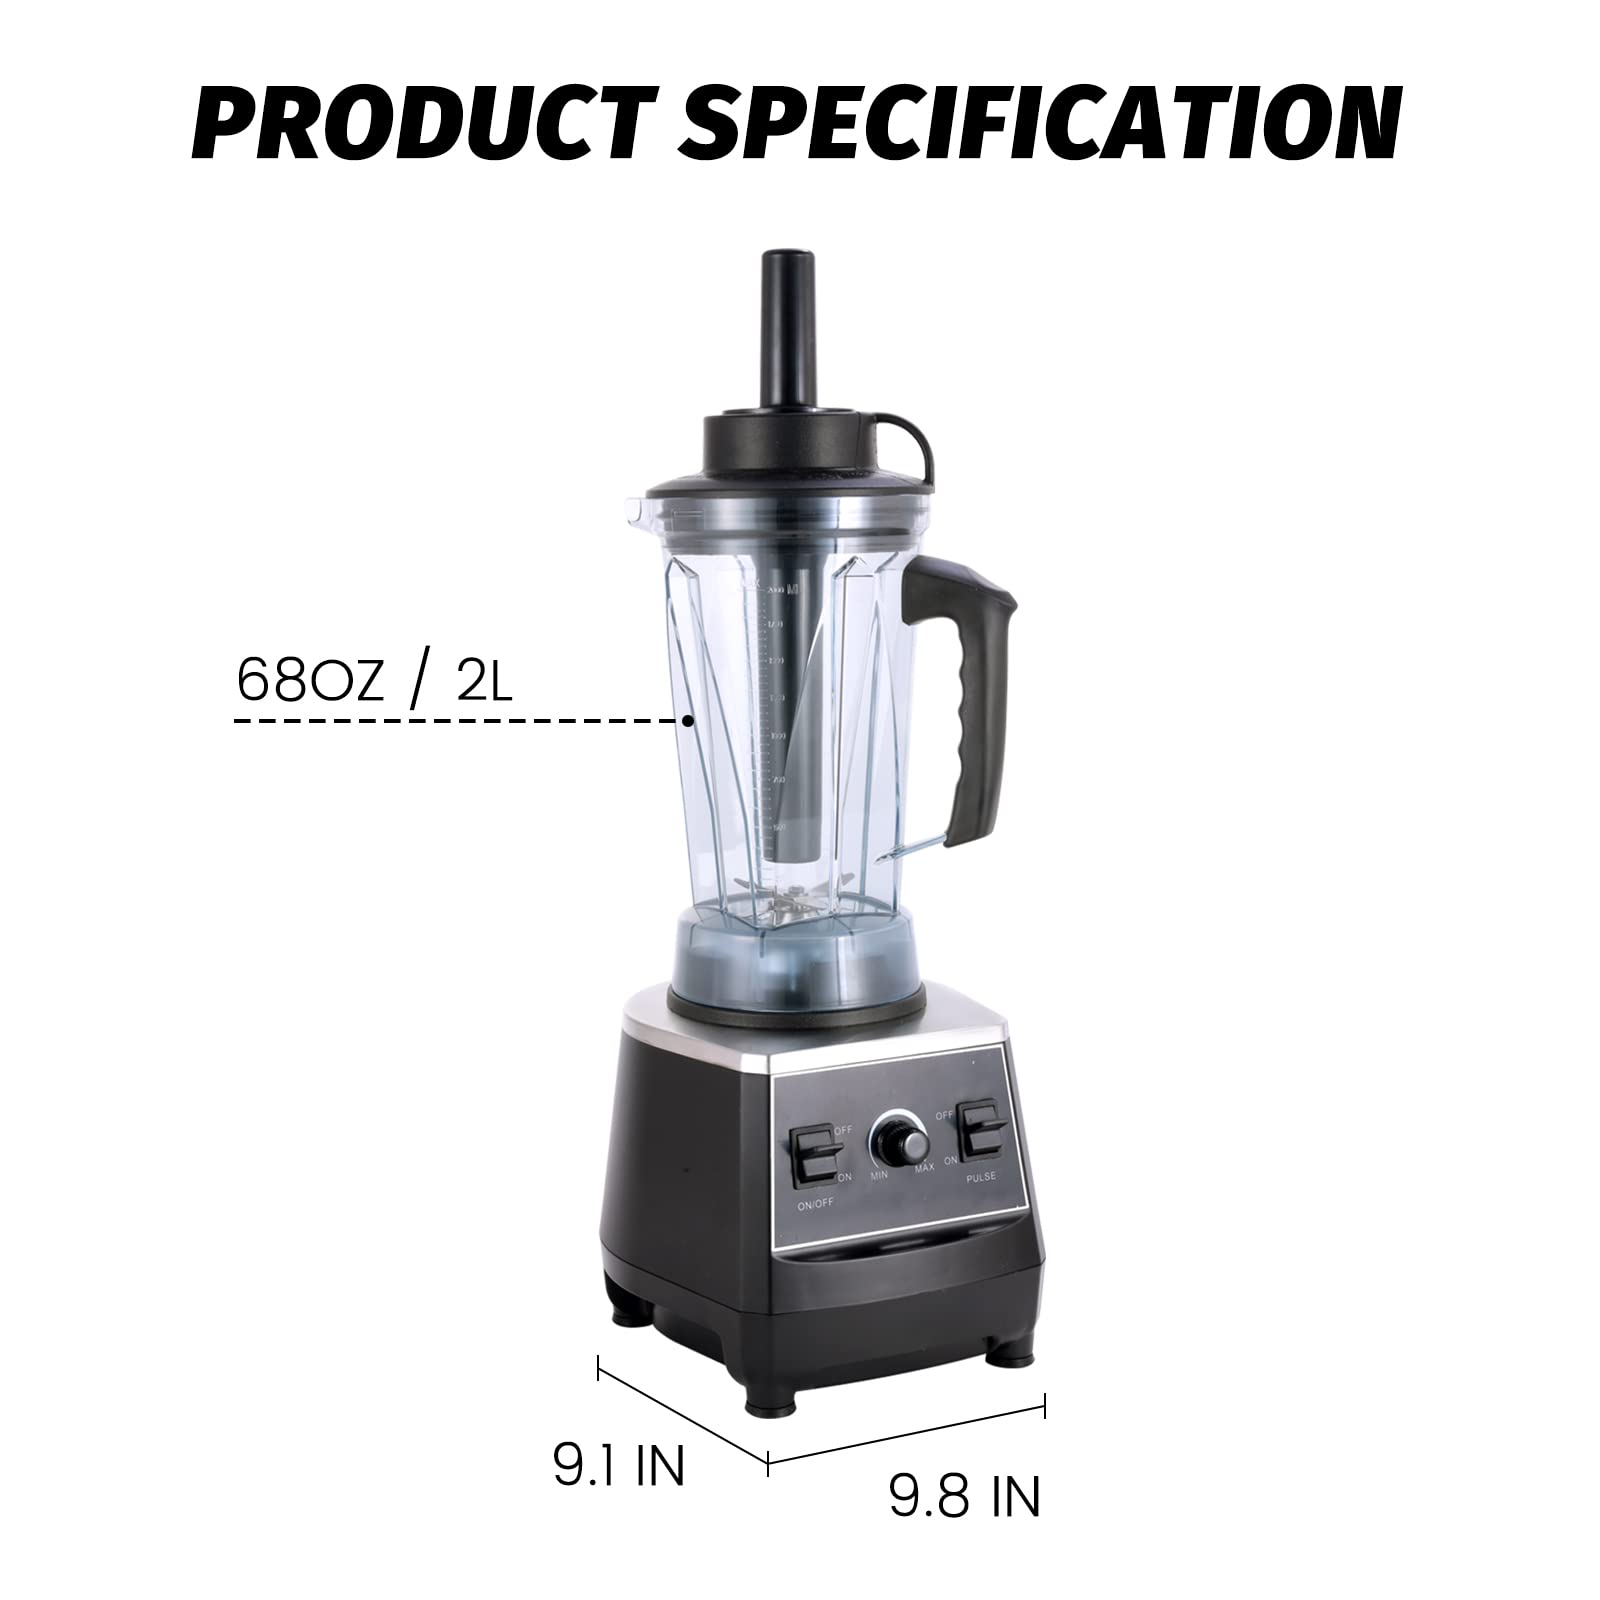 Hakka 2L Countertop Blender Juicer Shakes and Smoothies 8 Cups Fruit Maker 1500W